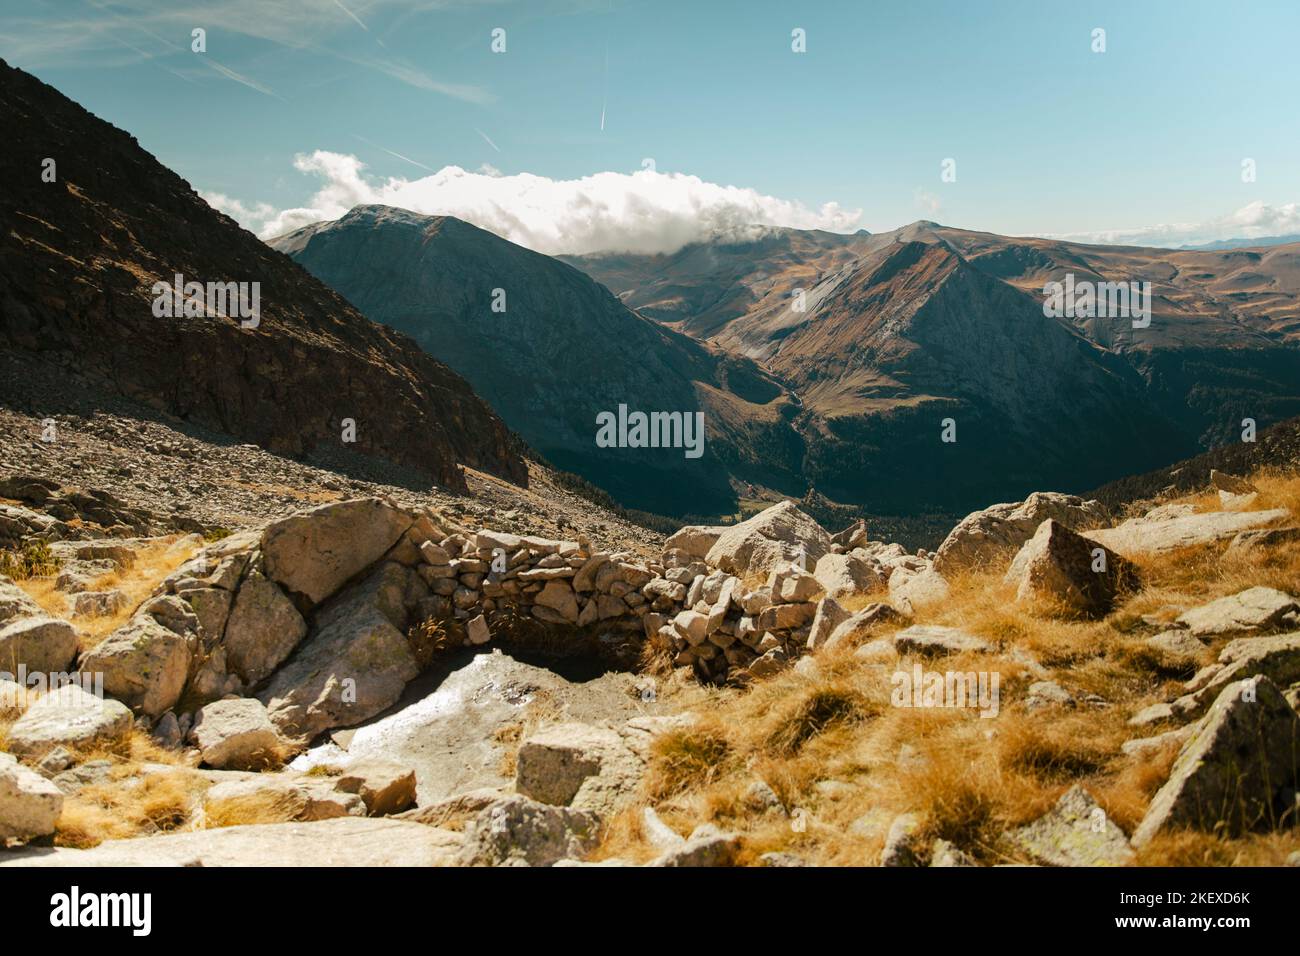 Mountain seen from the top during a beautiful autumn day Stock Photo